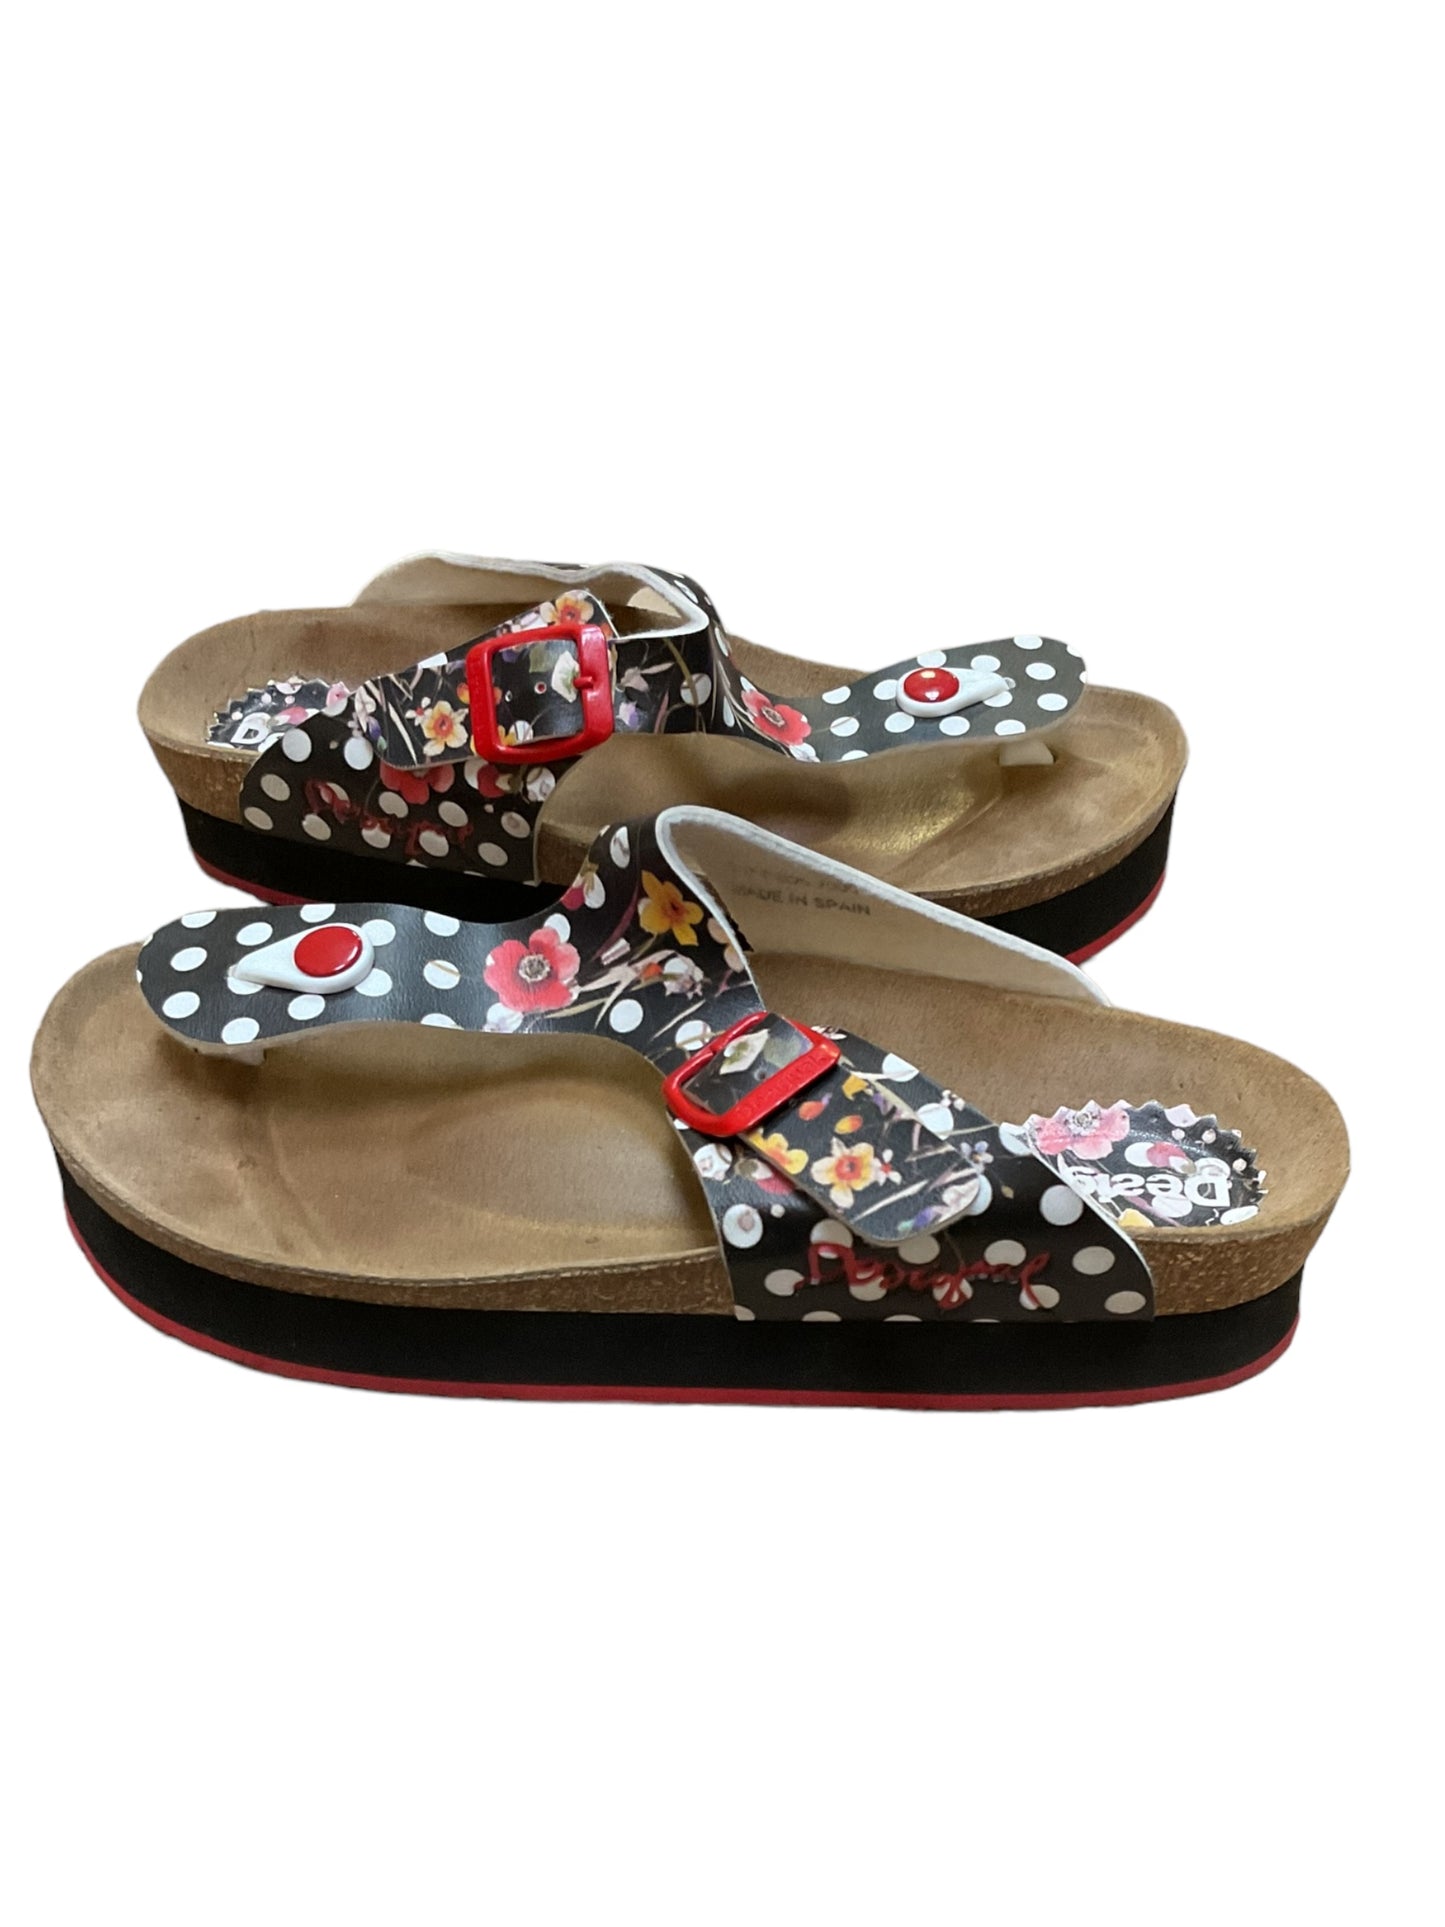 Sandals Flats By Desigual  Size: 7.5